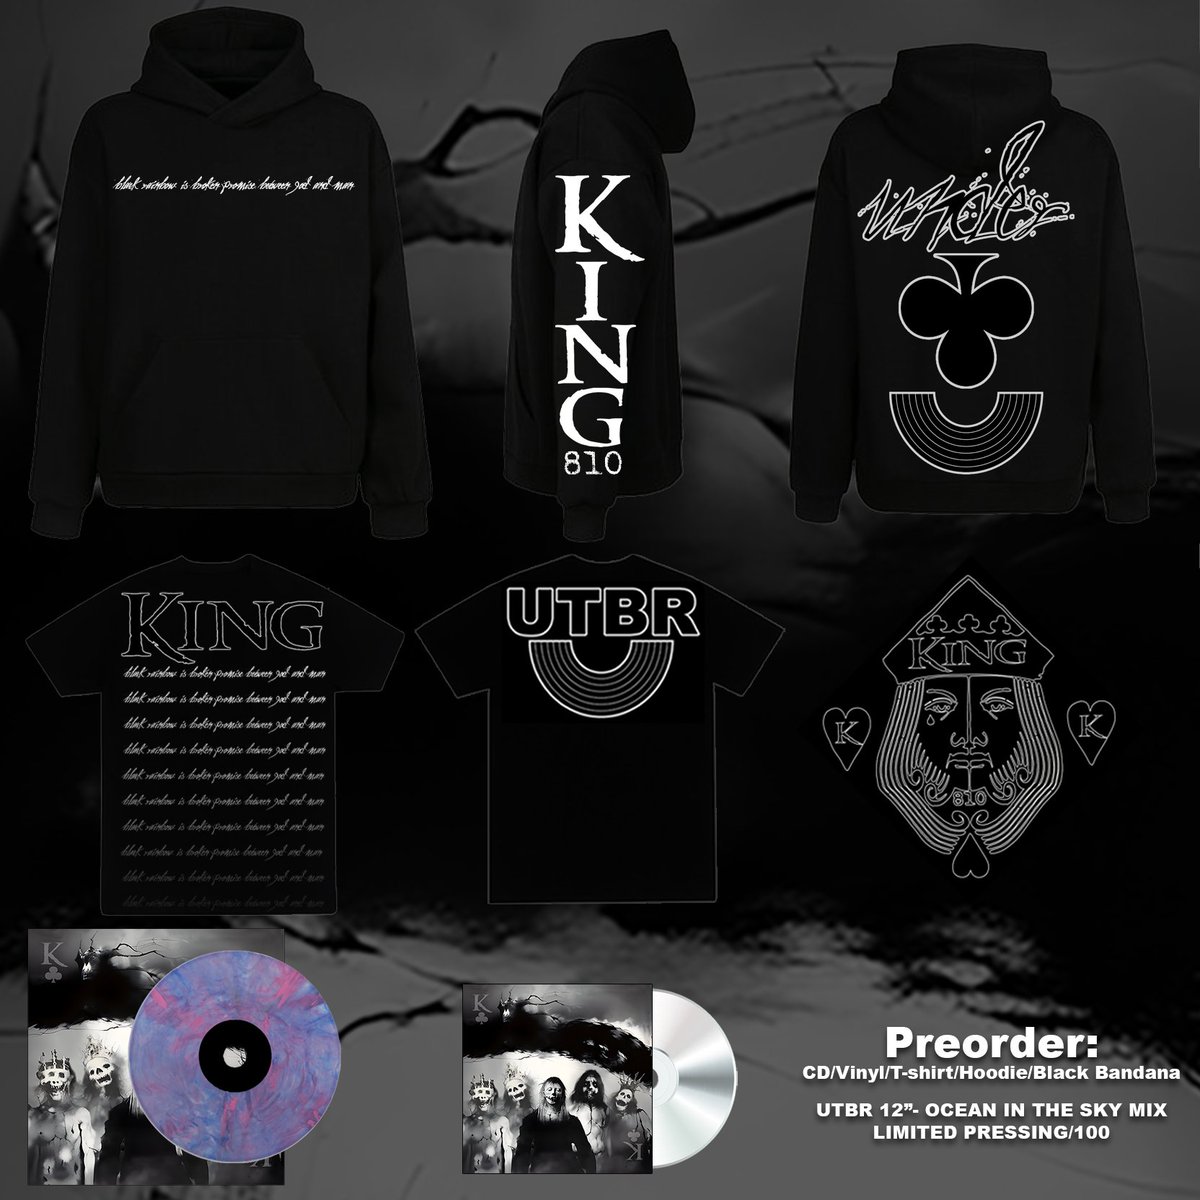 Our new EP “Under The Black Rainbow” is now on pre-sale @ king810.com Very limited number of vinyls and bundles, we will not reprint or restock. Make sure you’re on our discord/email list for first access to UTBR news & releases! #king810 #undertheblackrainbow